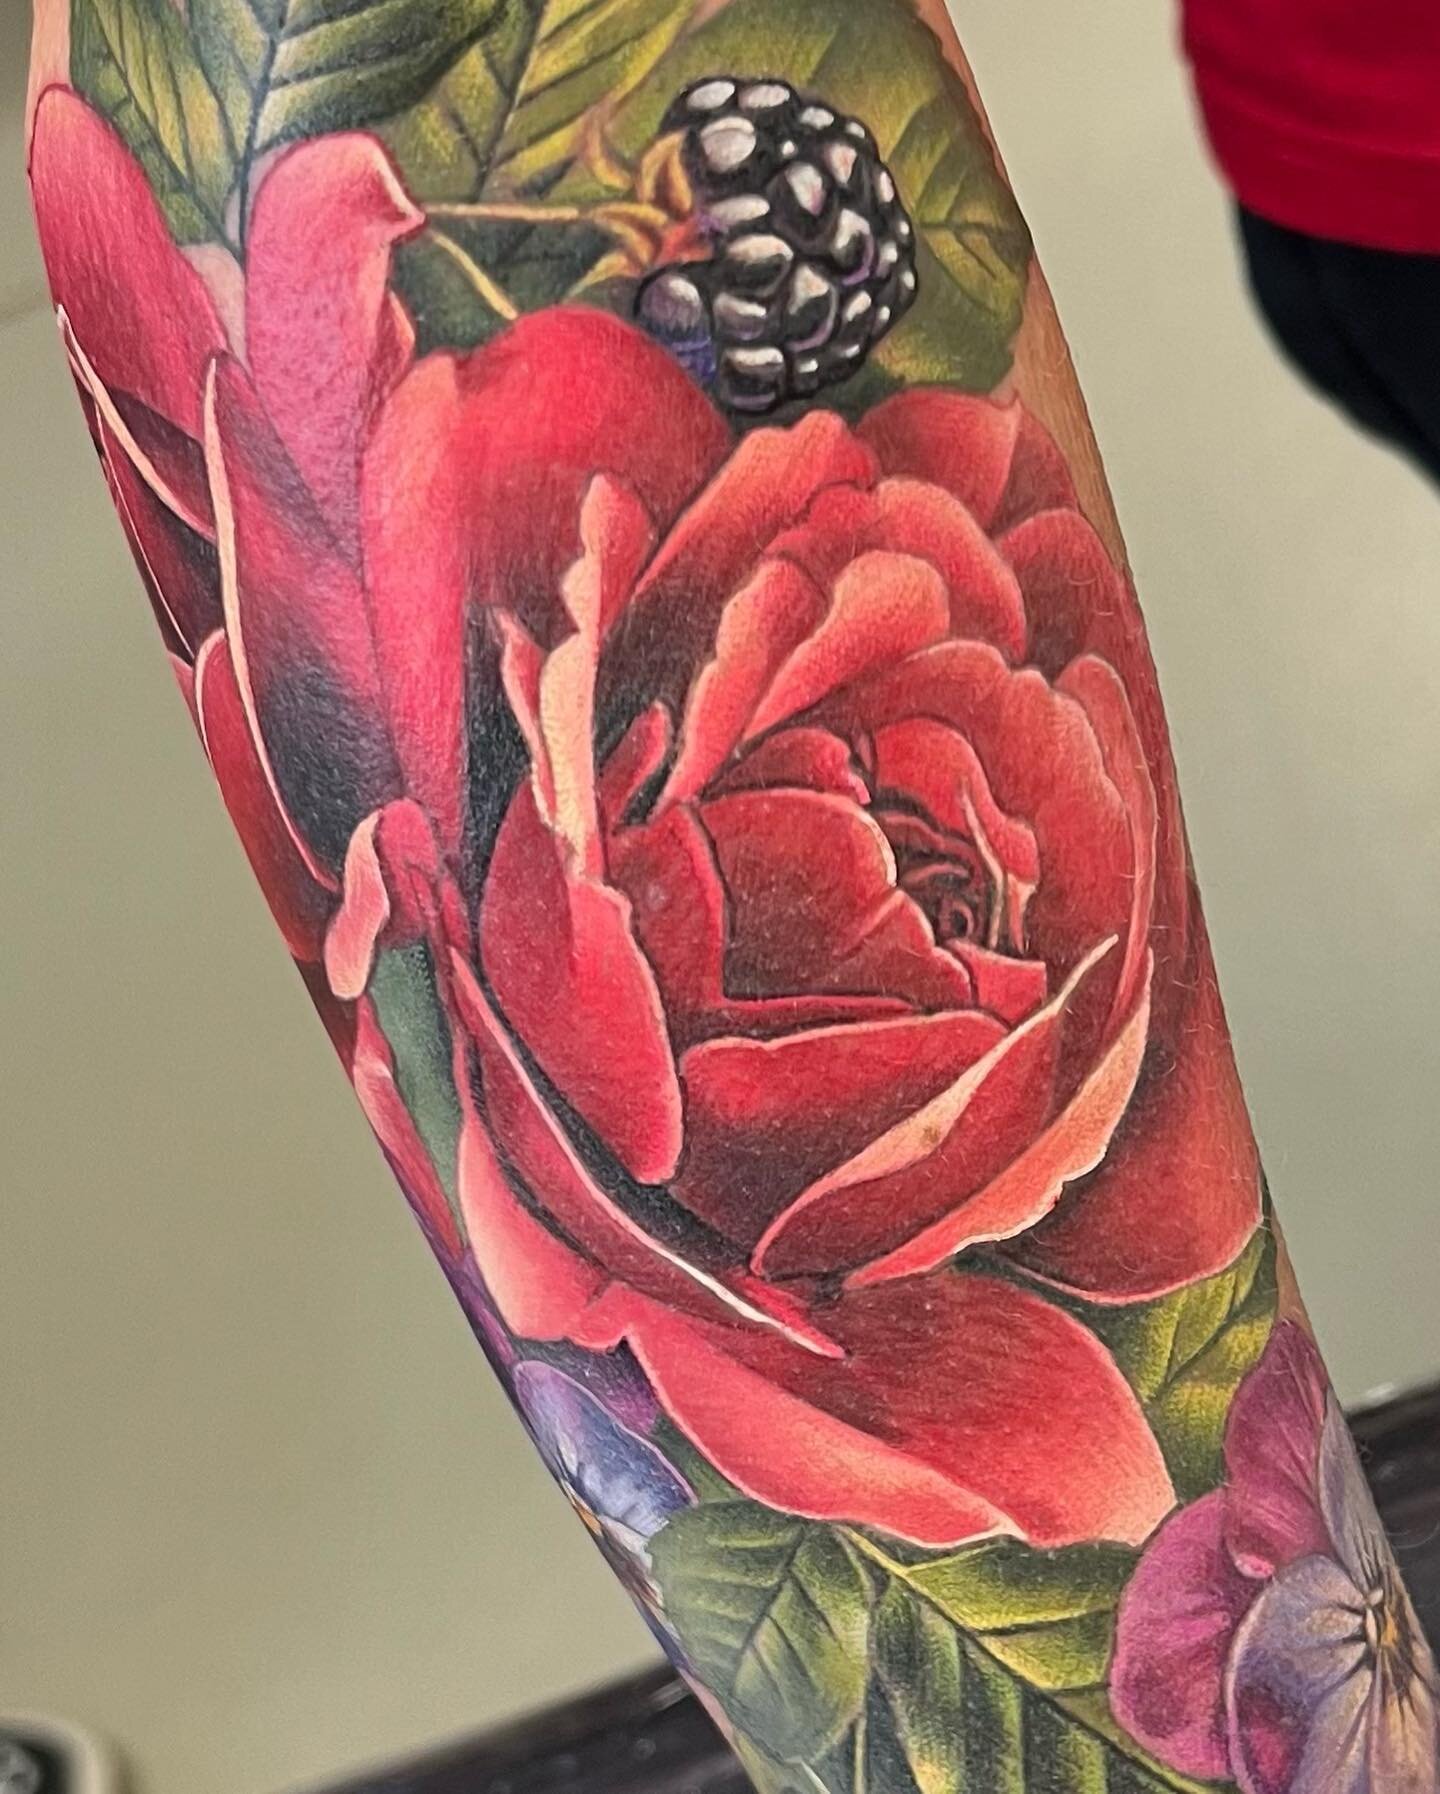 Thank Vikki 😊
Part healed, part fresh! 
Made with @fusion_ink and @killerinktattoo supplies in #edinburgh with @kwadron cartridges 

#floral #floraltattoo #parthealed #partfresh #tattoo #roses #rosetattoo #berries #berriestattoo #pansy #pansytattoo 